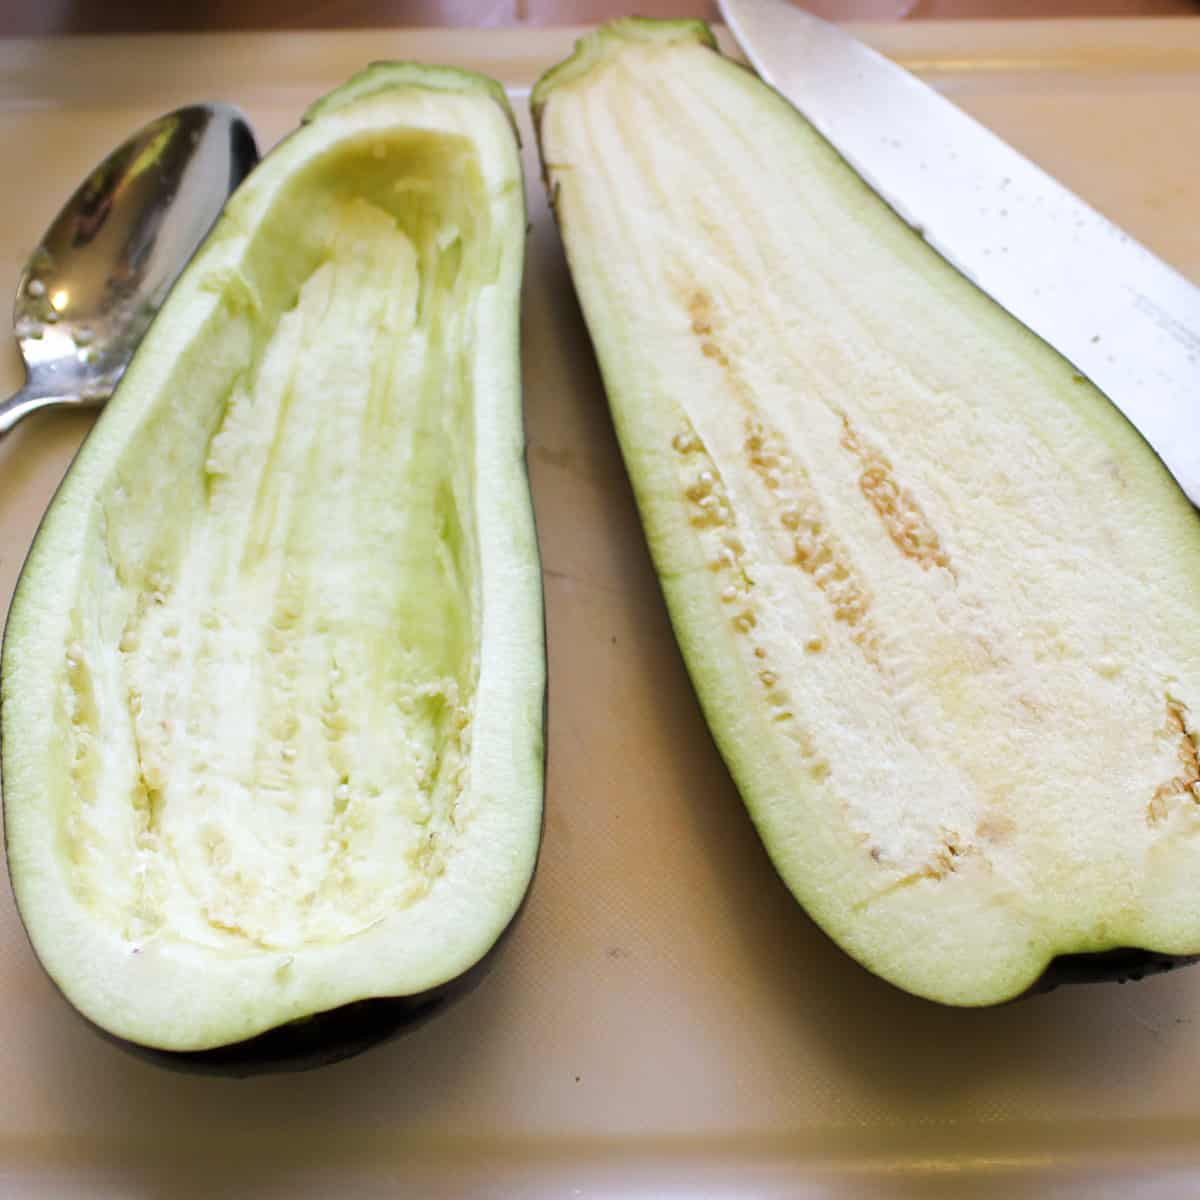 An eggplant on a cutting board cut in half with the insides scooped out.